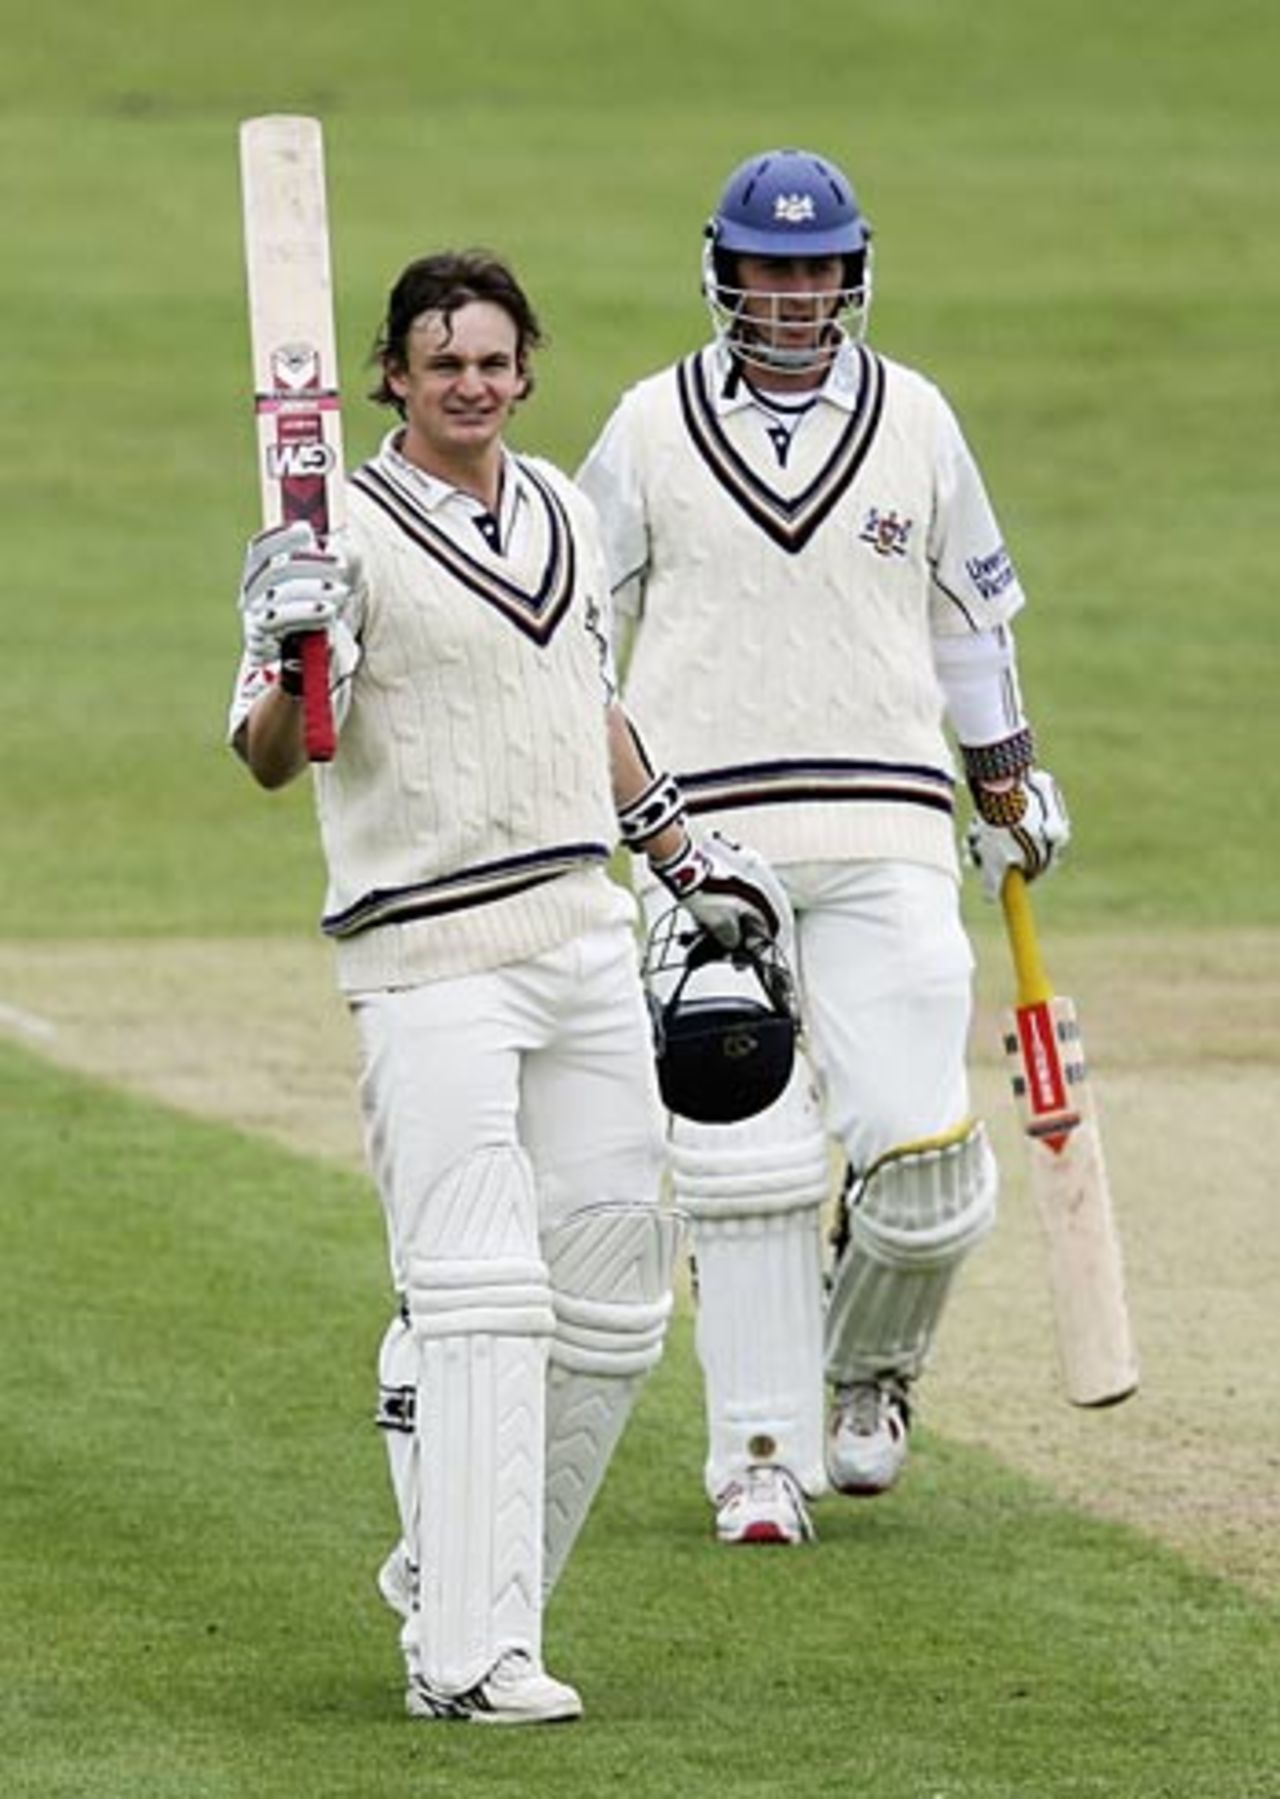 Alex Gidman reaches his century against Somerset as Gloucestershire pile up the runs, Gloucestershire v Somerset, Bristol, April 19, 2006